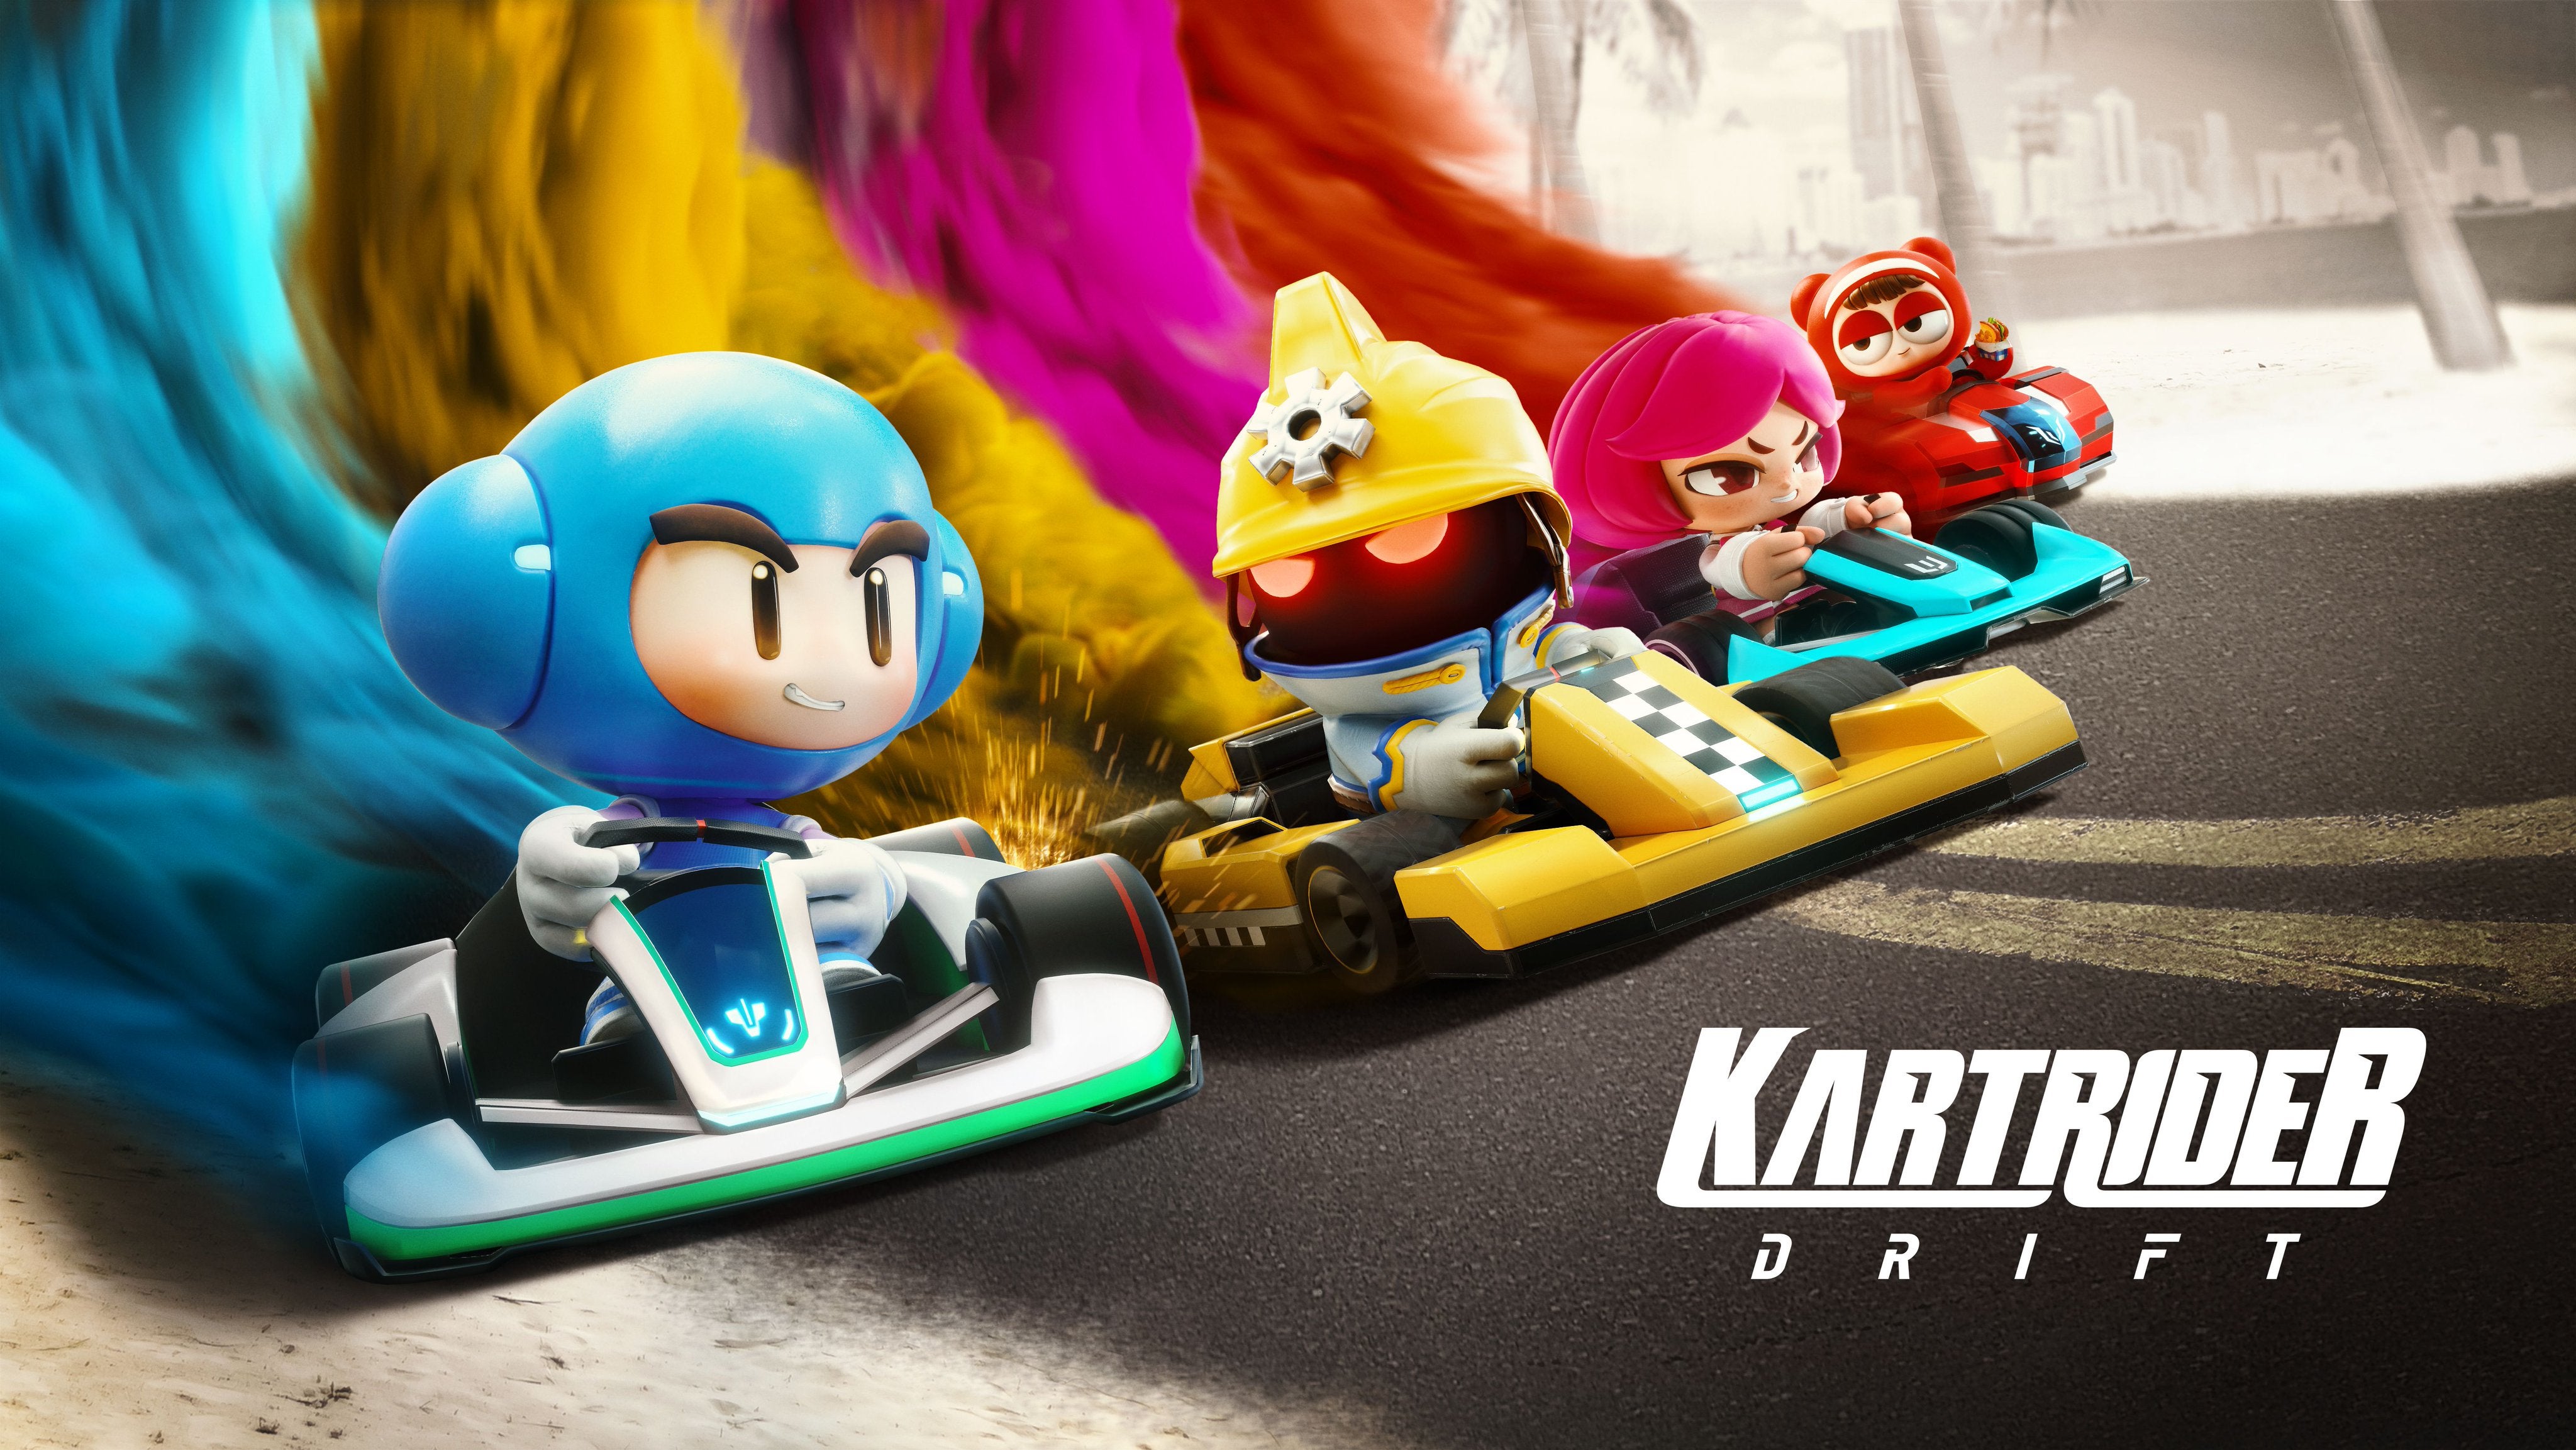 Image for KartRider: Drift – a free-to-play kart racer – lands on PS4 and PS5 in 2022